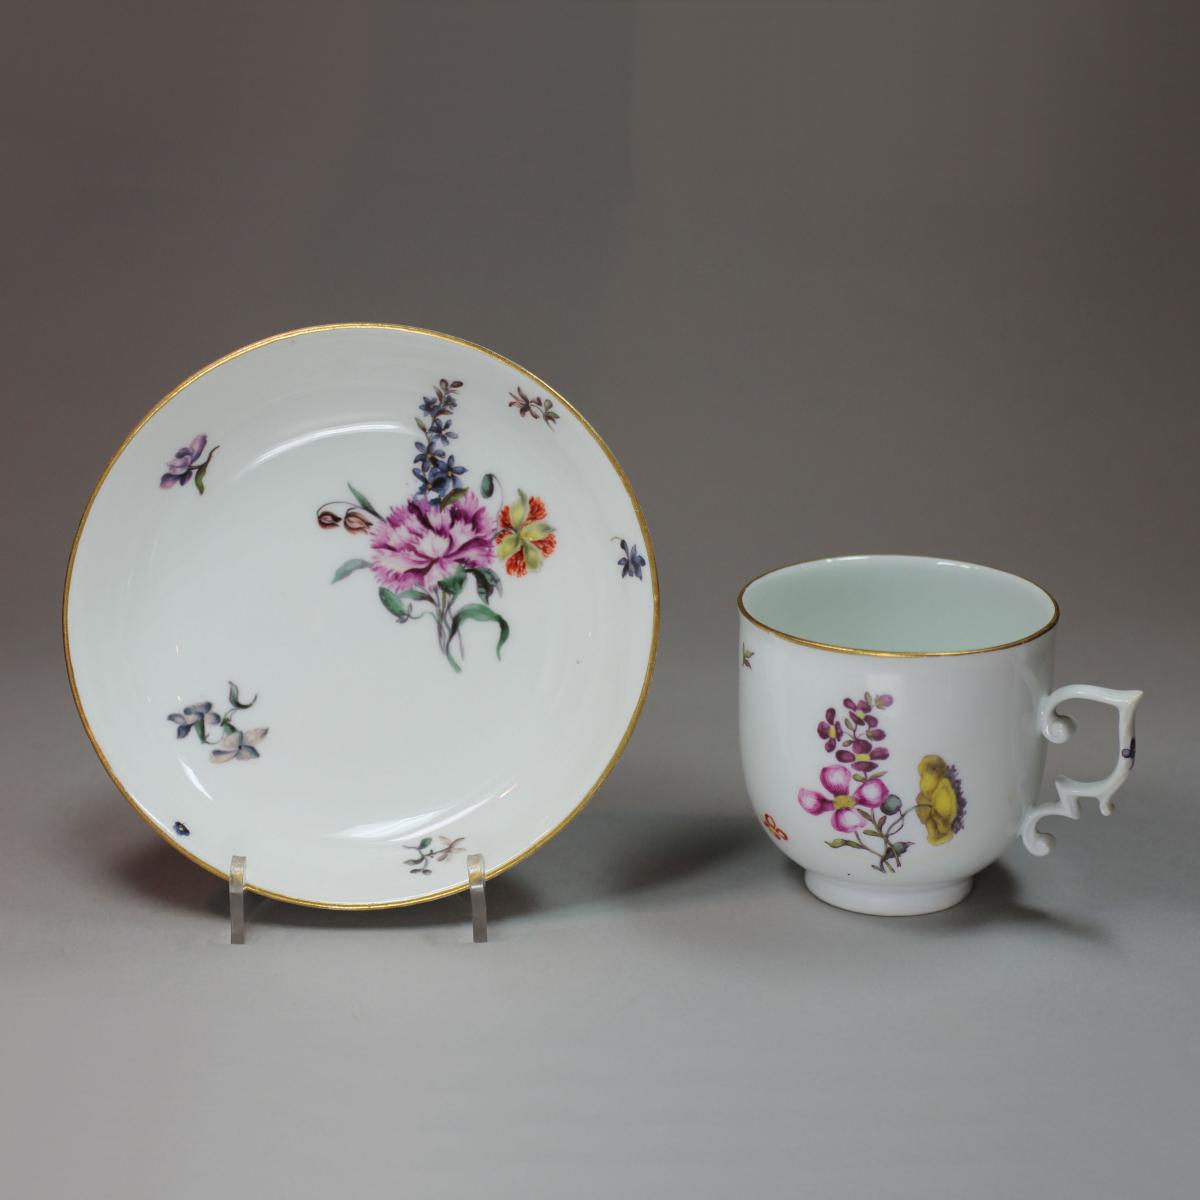 Meissen coffee cup and saucer, circa 1760 